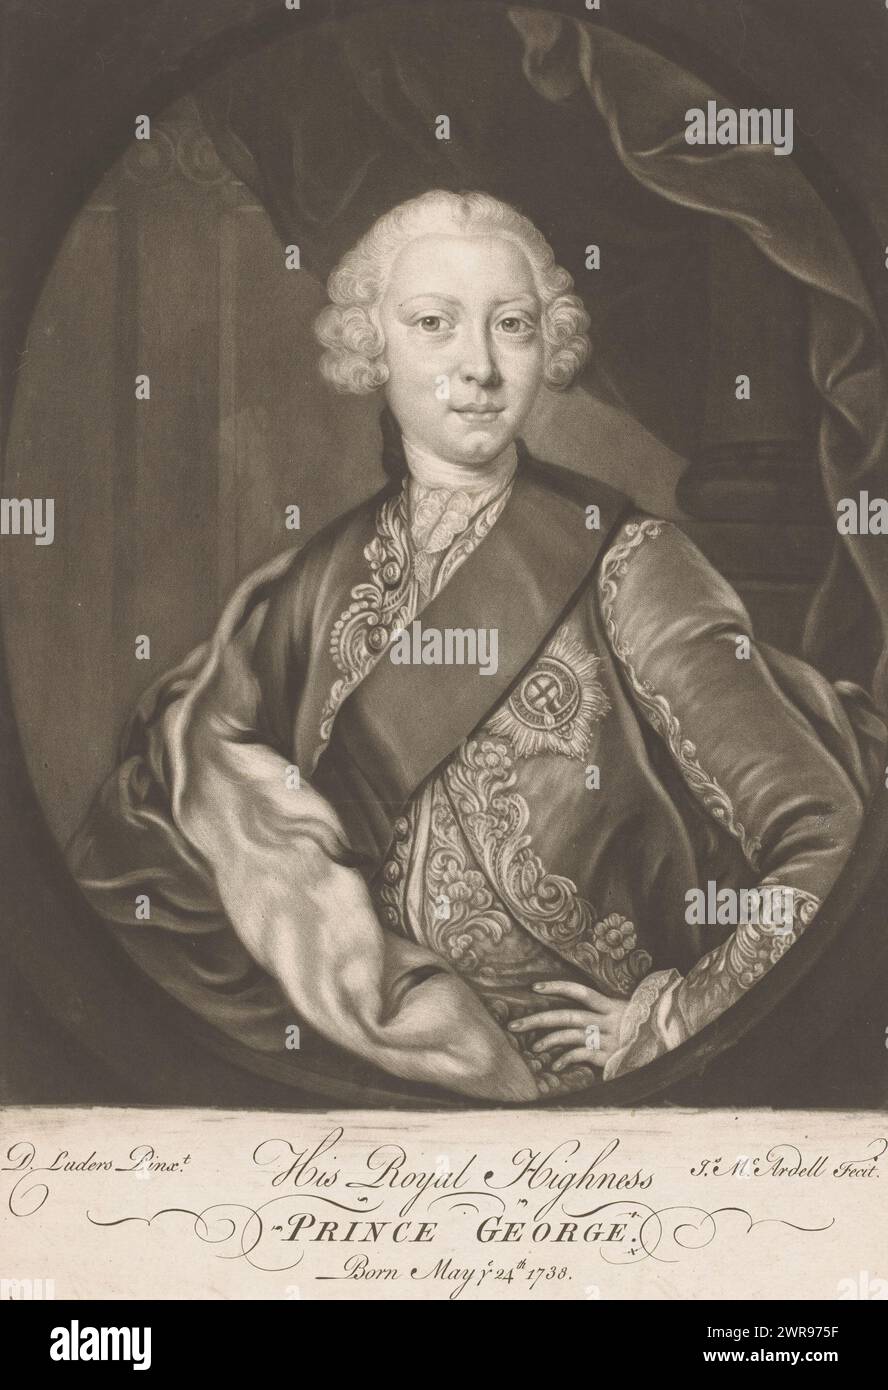 Portrait of George III of the United Kingdom, His Royal Highness Prince George (title on object), print maker: James McArdell, after painting by: David Lüders, London, 1751 - c. 1756, paper, height 323 mm × width 222 mm, print Stock Photo